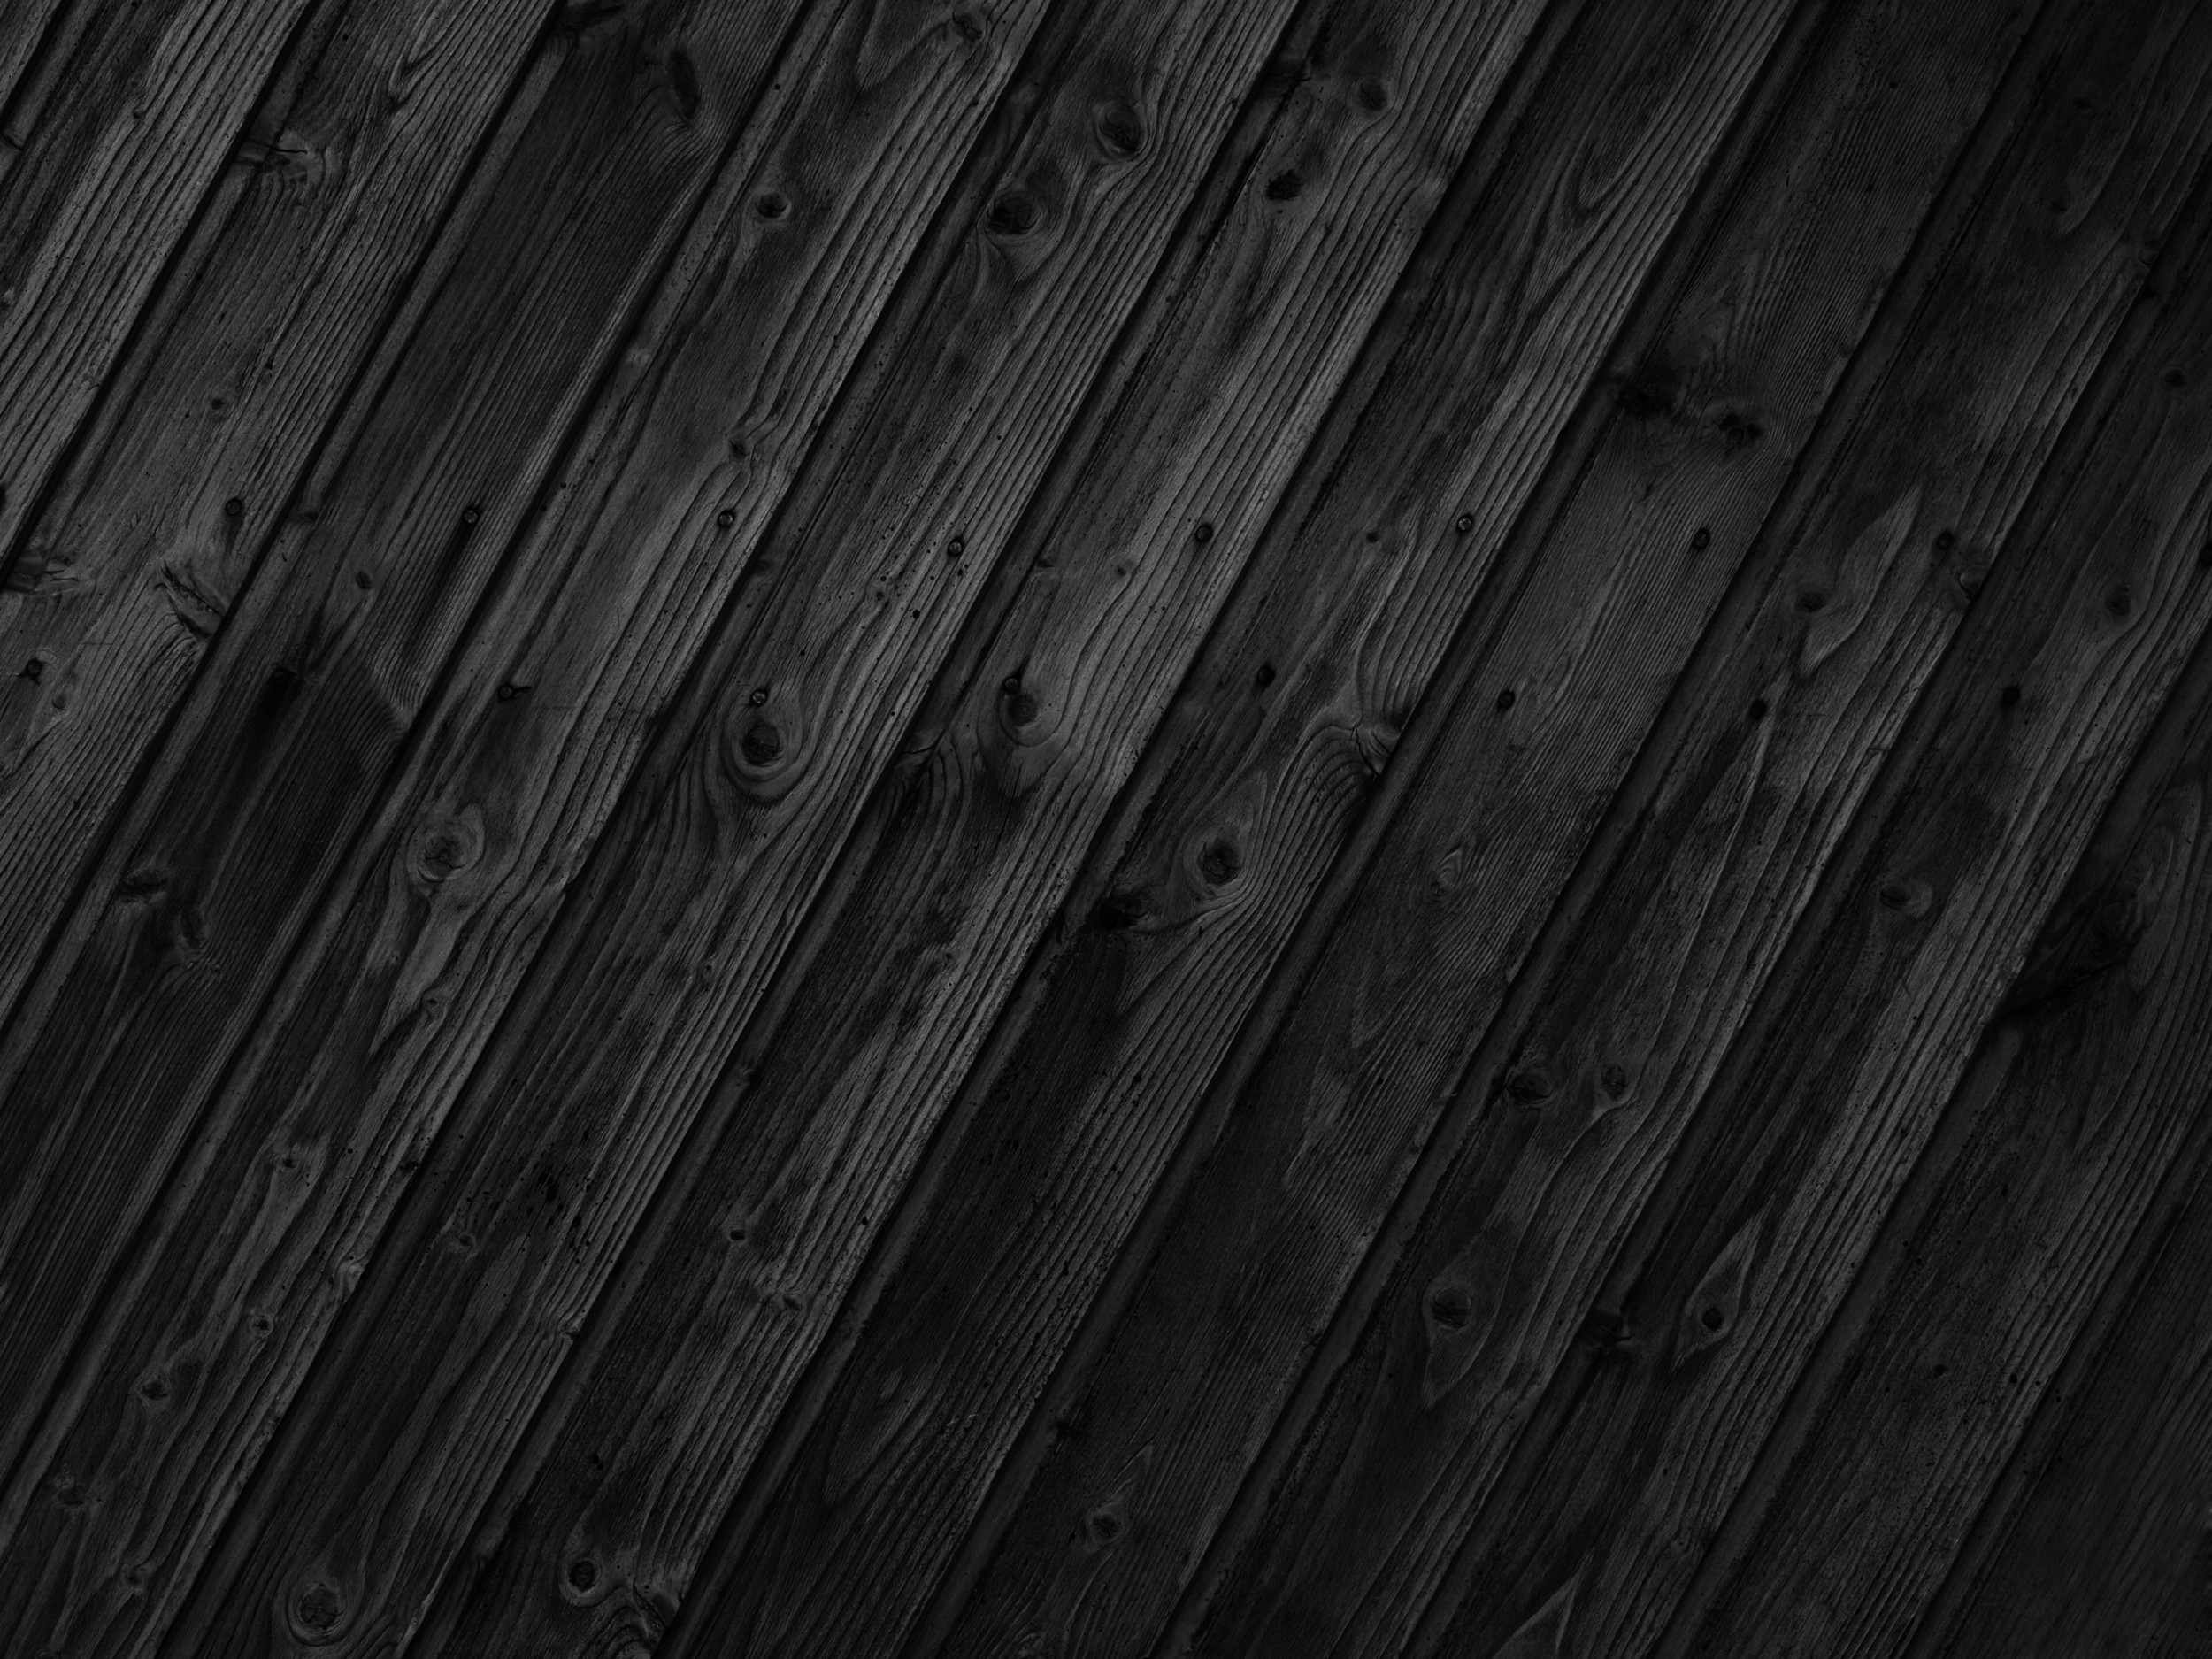 2500x1875 Black Wood Wallpapers Hd Black Wood Wallpapers Images Photos Pictures  Backgrounds. Black Wood Wallpaper Hd